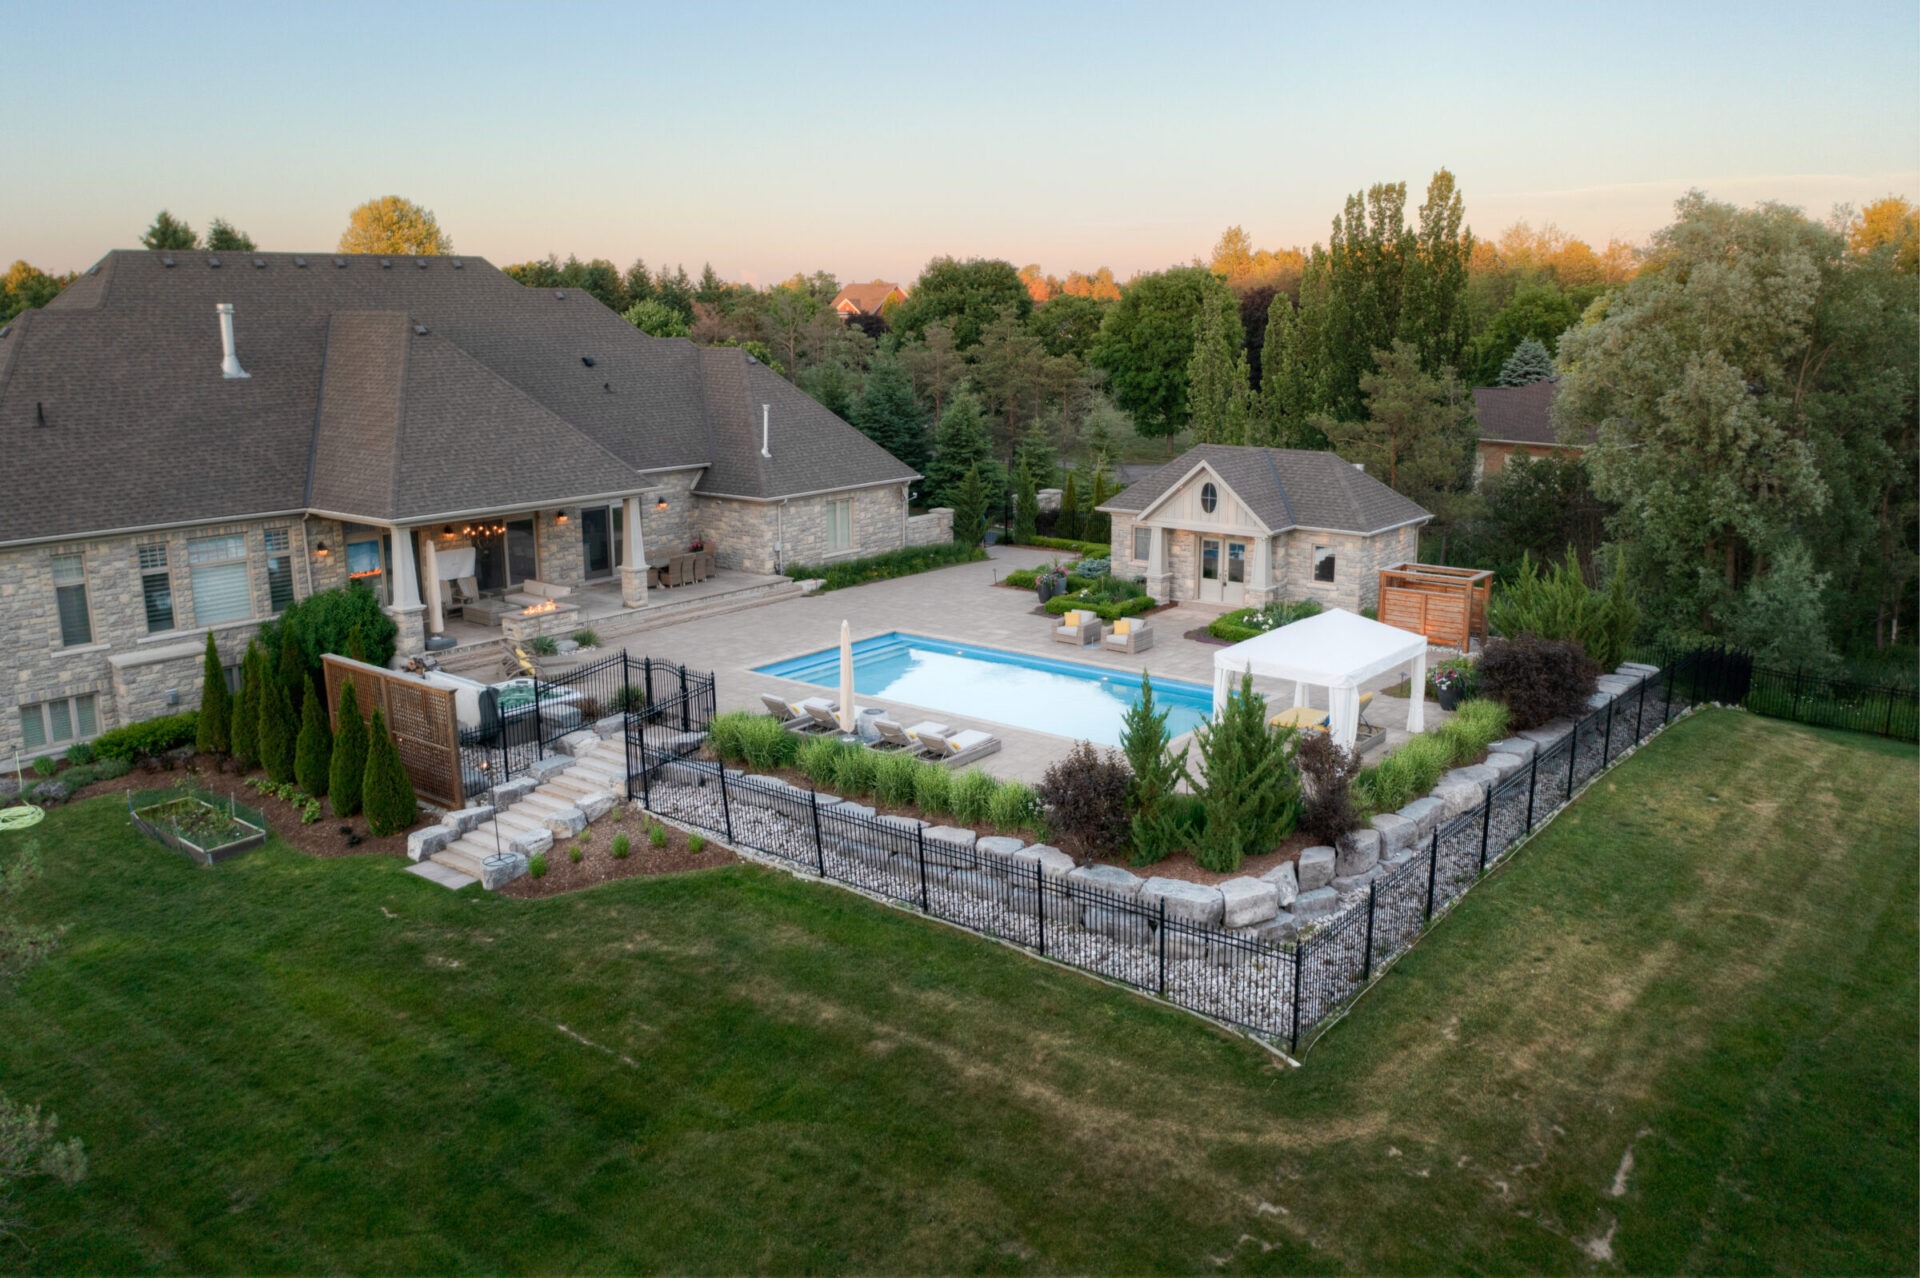 This image features a large, luxurious stone house with a swimming pool, a pool house, and a well-manicured lawn during twilight.